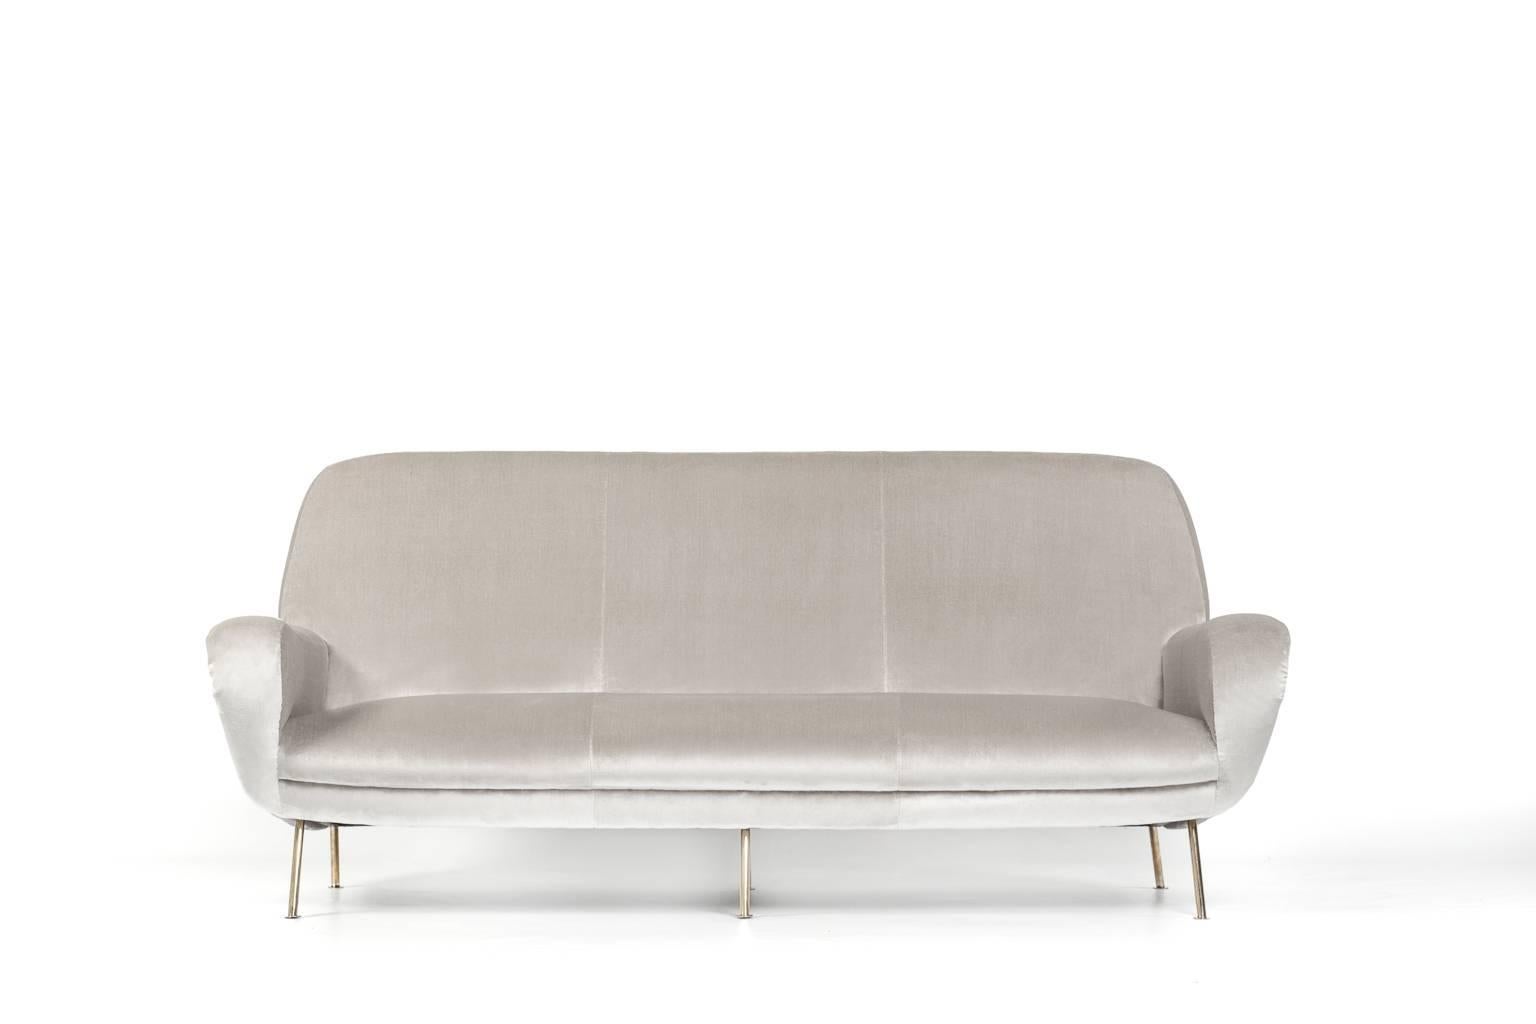 Mid-Century Modern Exceptional Sofa by Gianfranco Frattini for Cassina, Italy, 1954